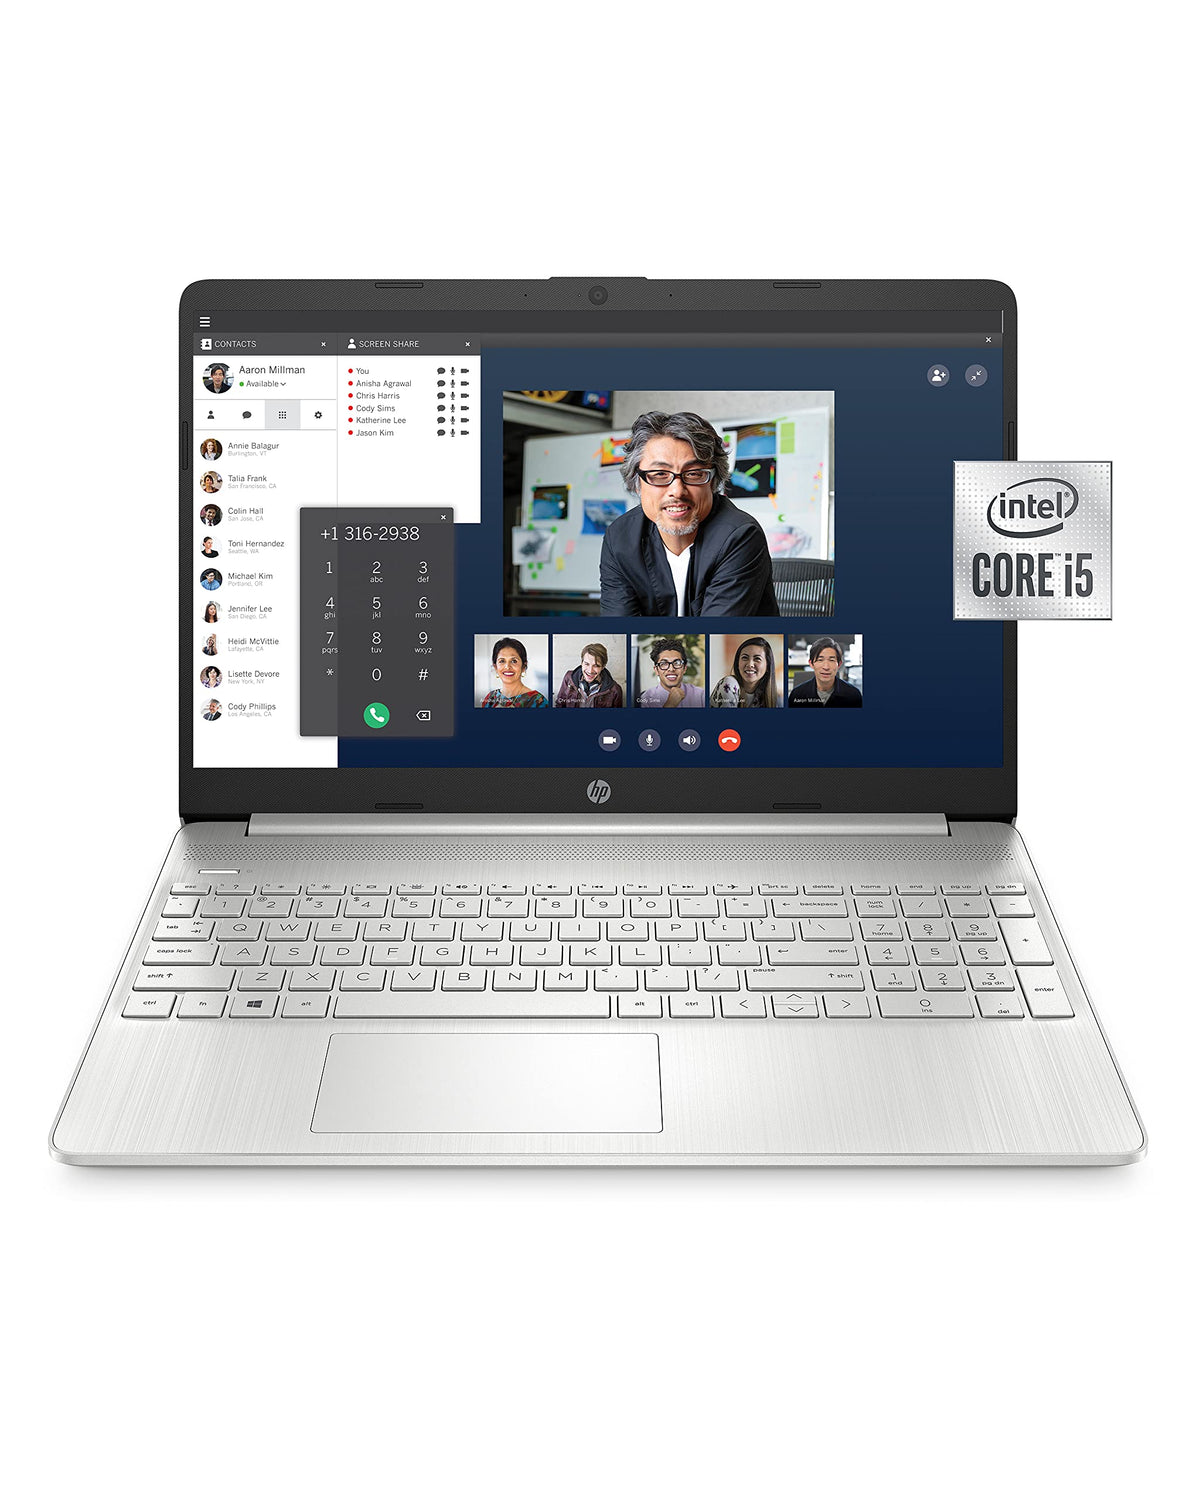 HP 15-dy1036nr 10th Gen Intel Core i5-1035G1, 15.6-Inch FHD Laptop, Natural Silver